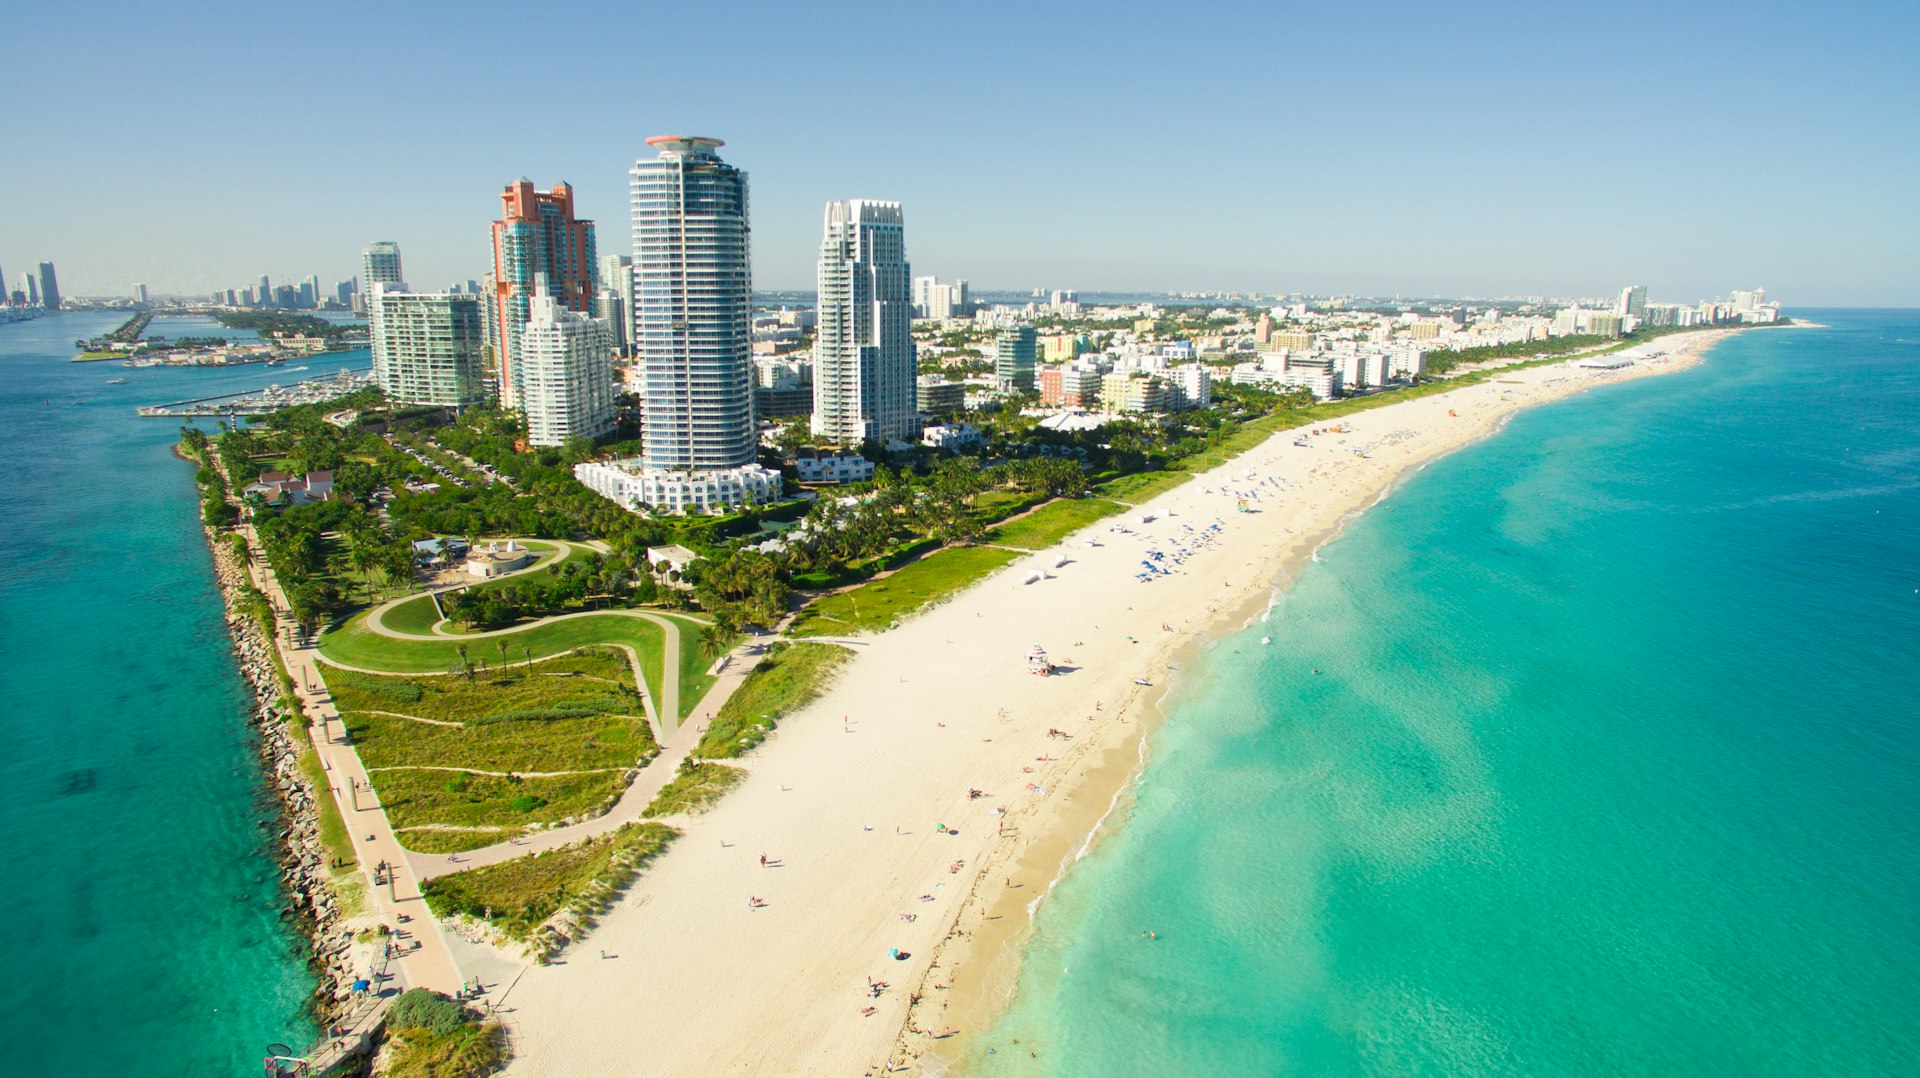 Aerial view of South Beach, with high rises dotting the shoreline